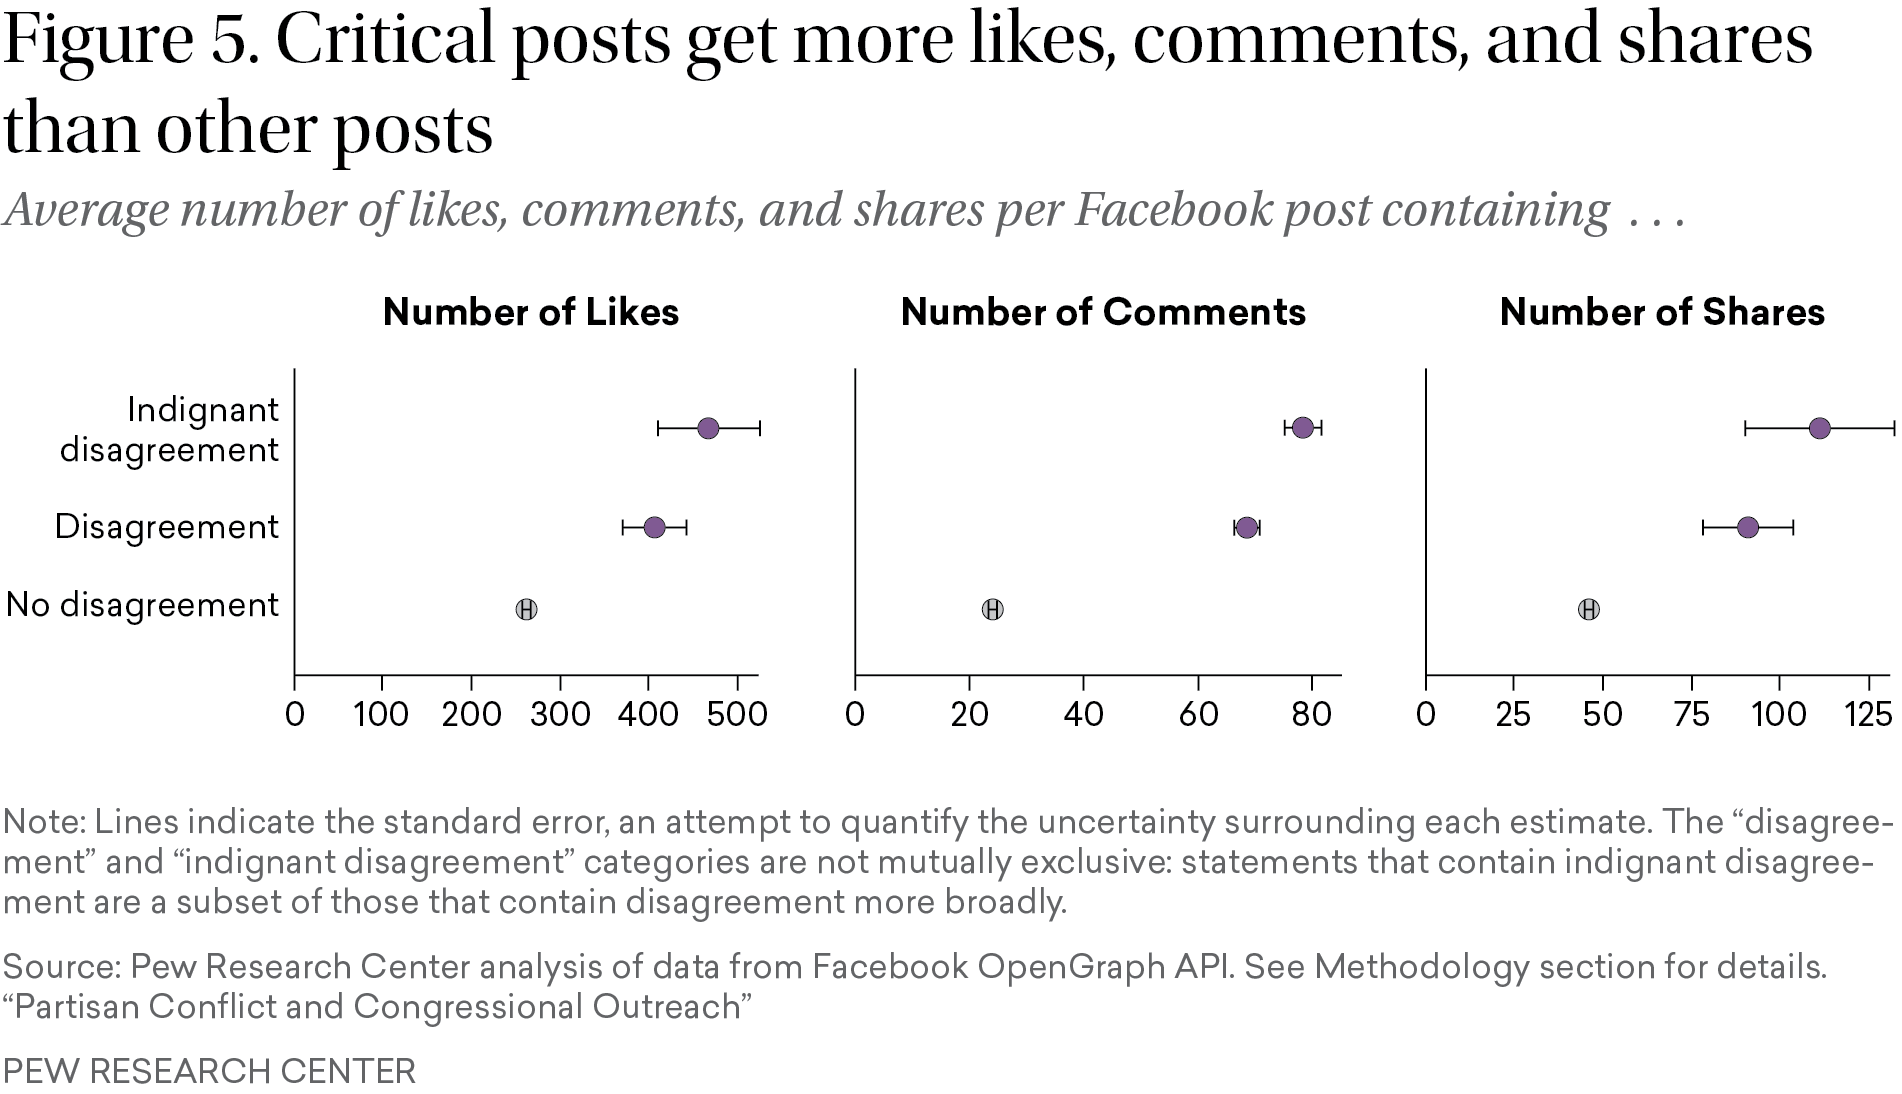 Figure 5: Three scatter charts show higher rates of engagement on social media for posts that express “indignant disagreement” than those of regular disagreement or no disagreement.